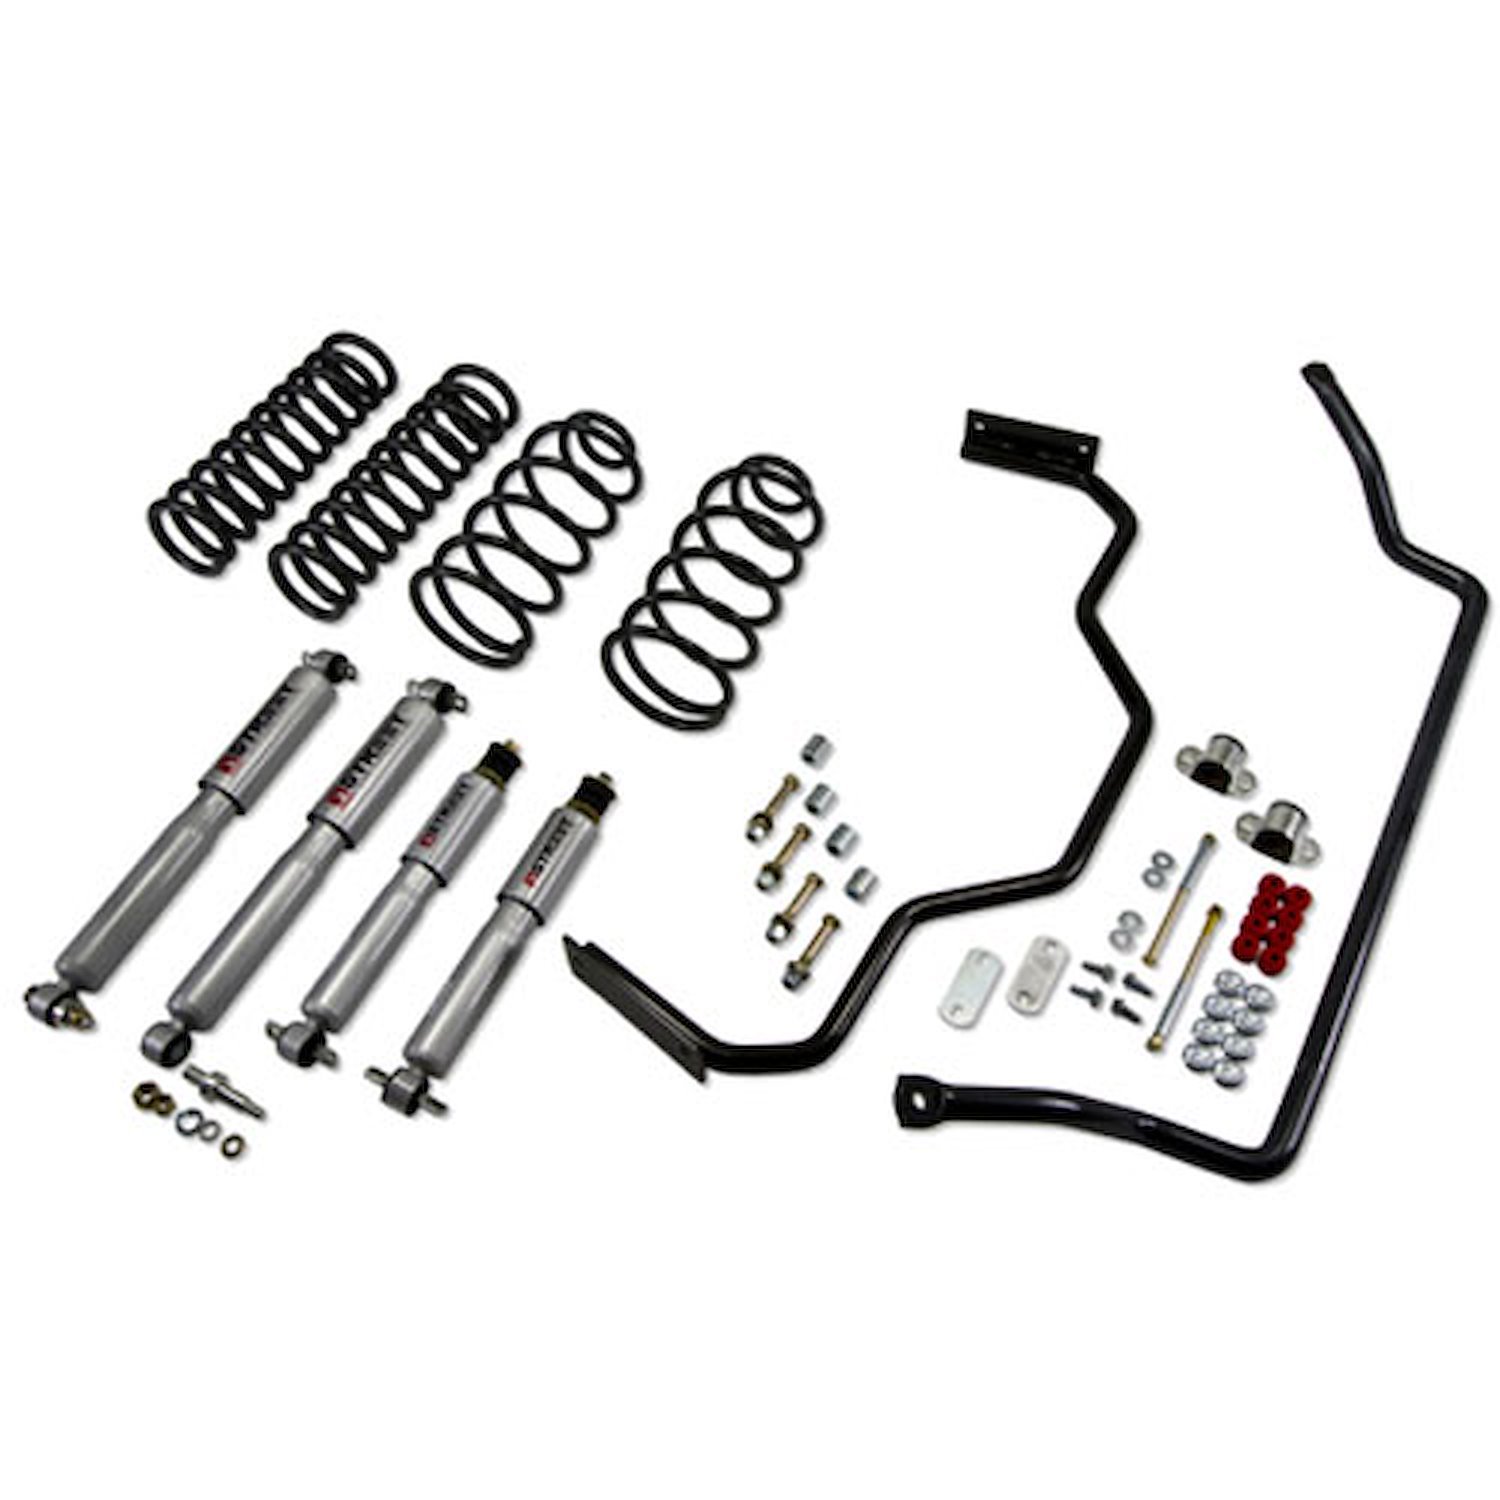 Muscle Car Suspension Kit for 1964-1966 GM A-Body